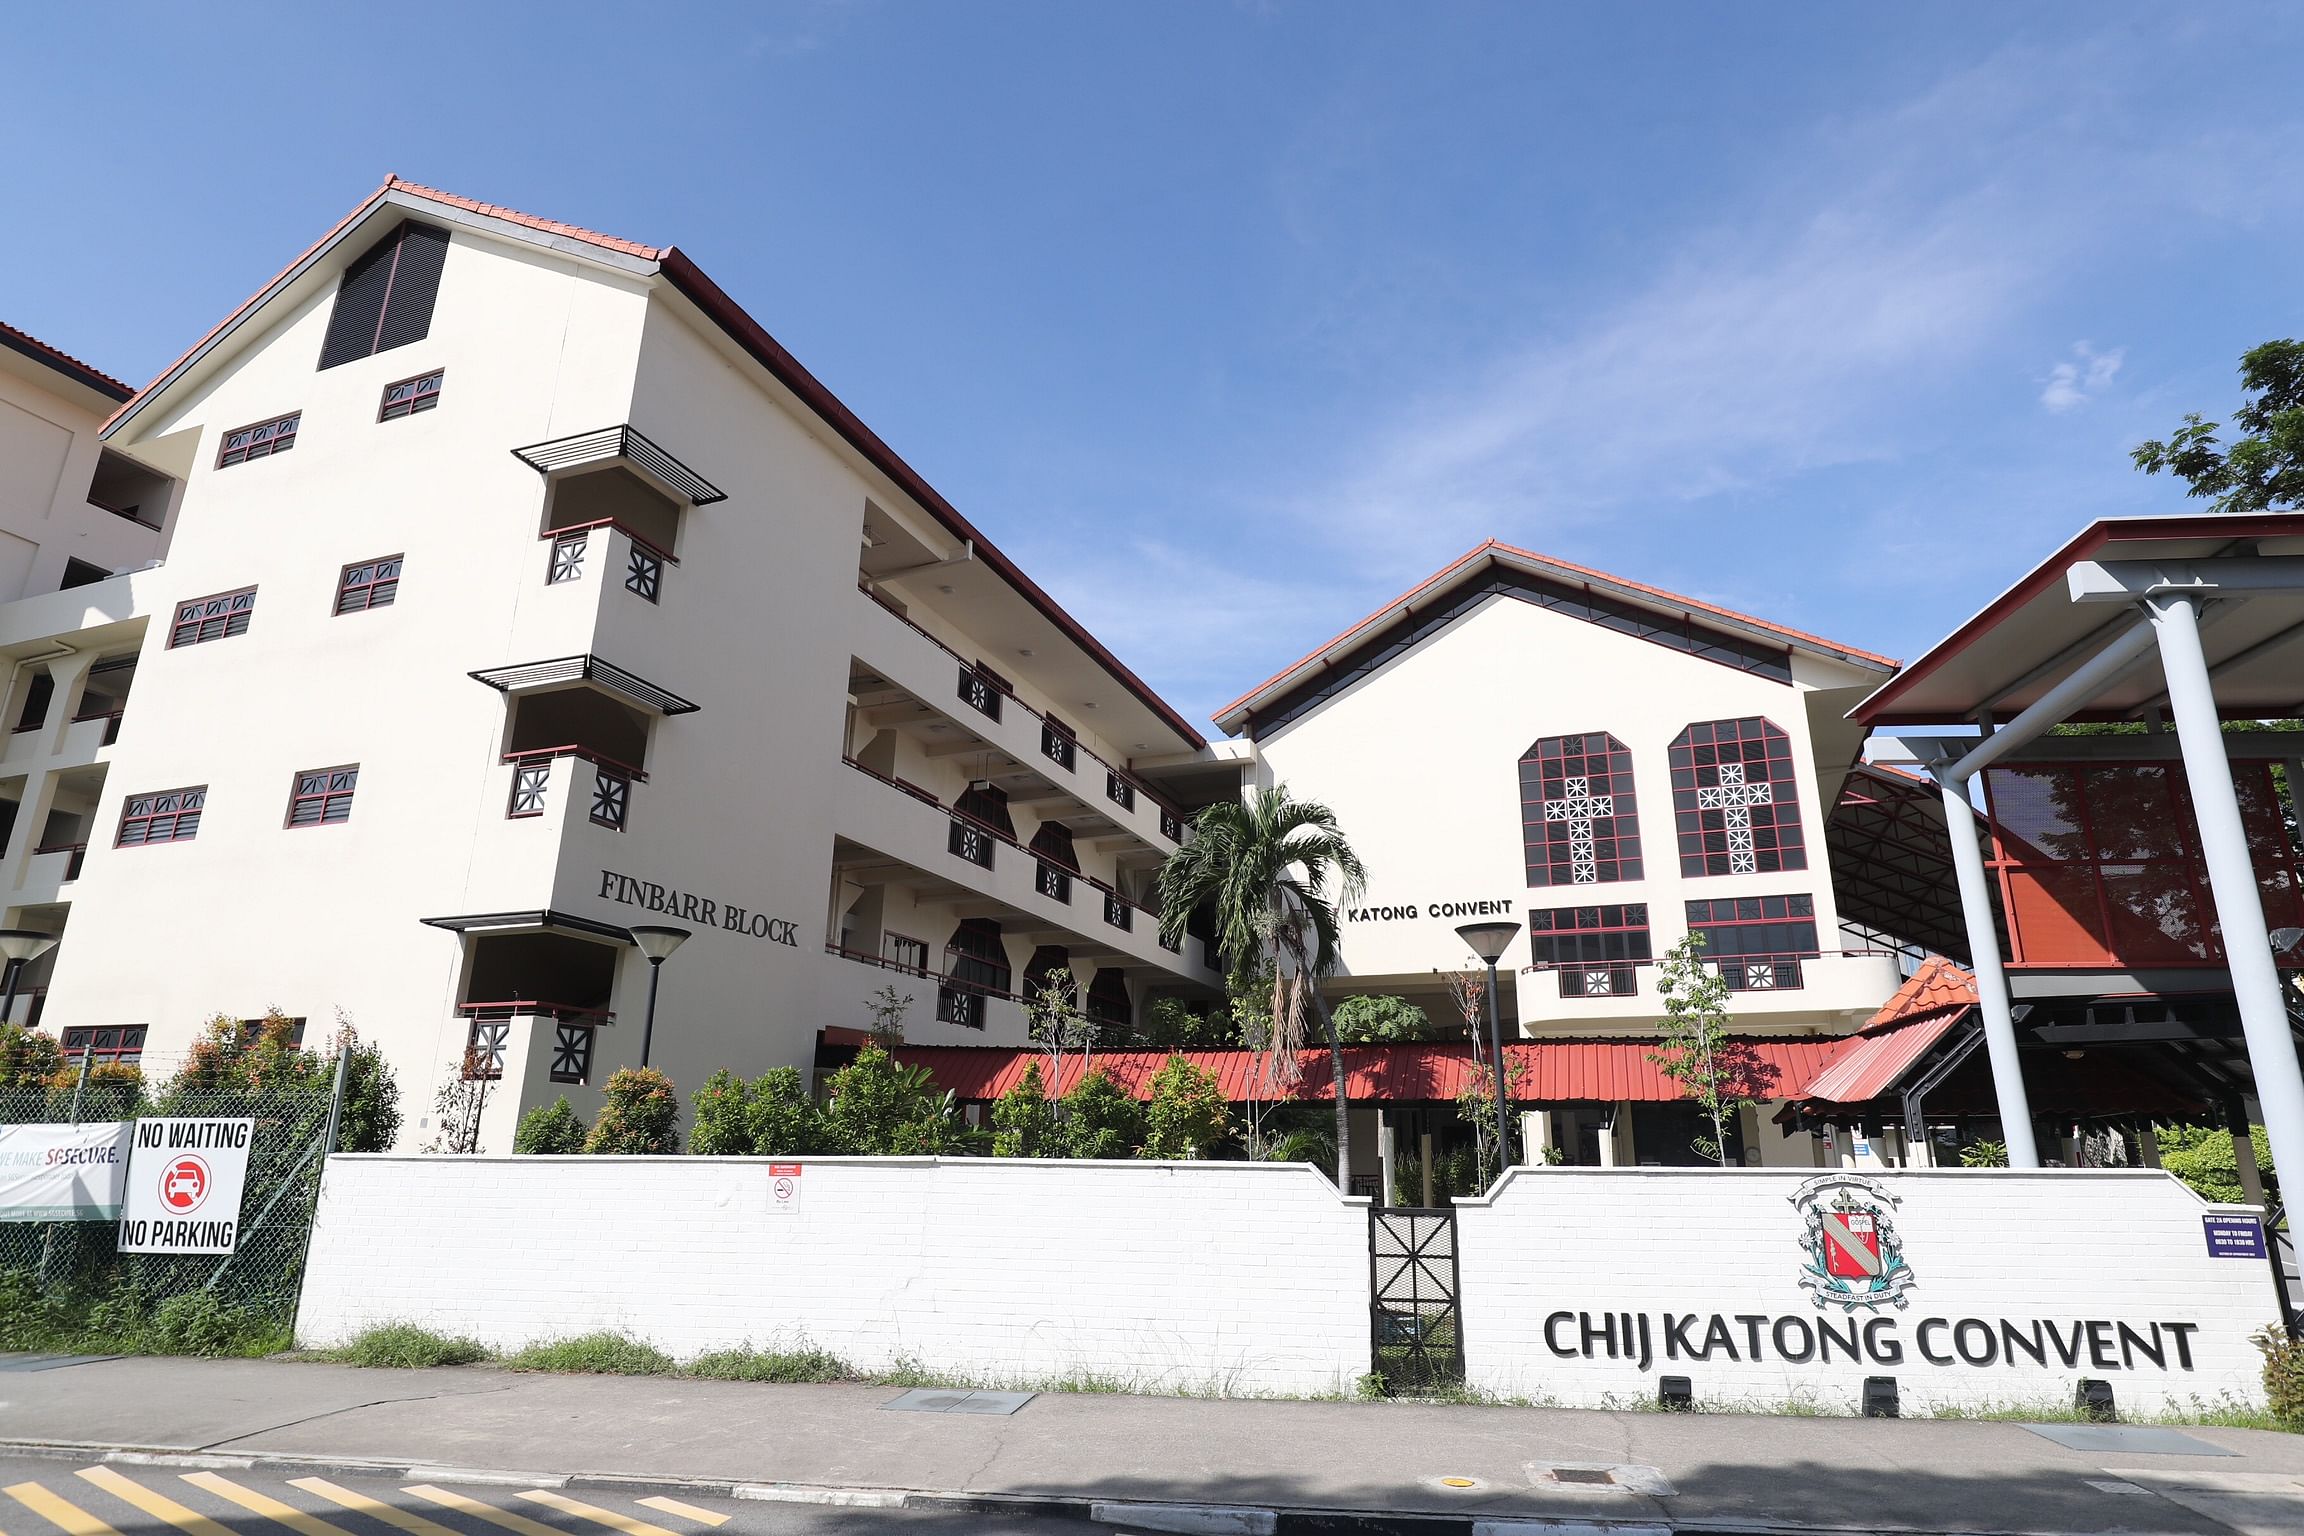 5 More Covid 19 Cases Linked To Chij Katong Convent Cluster 8 Patients In Icu Singapore News Top Stories The Straits Times